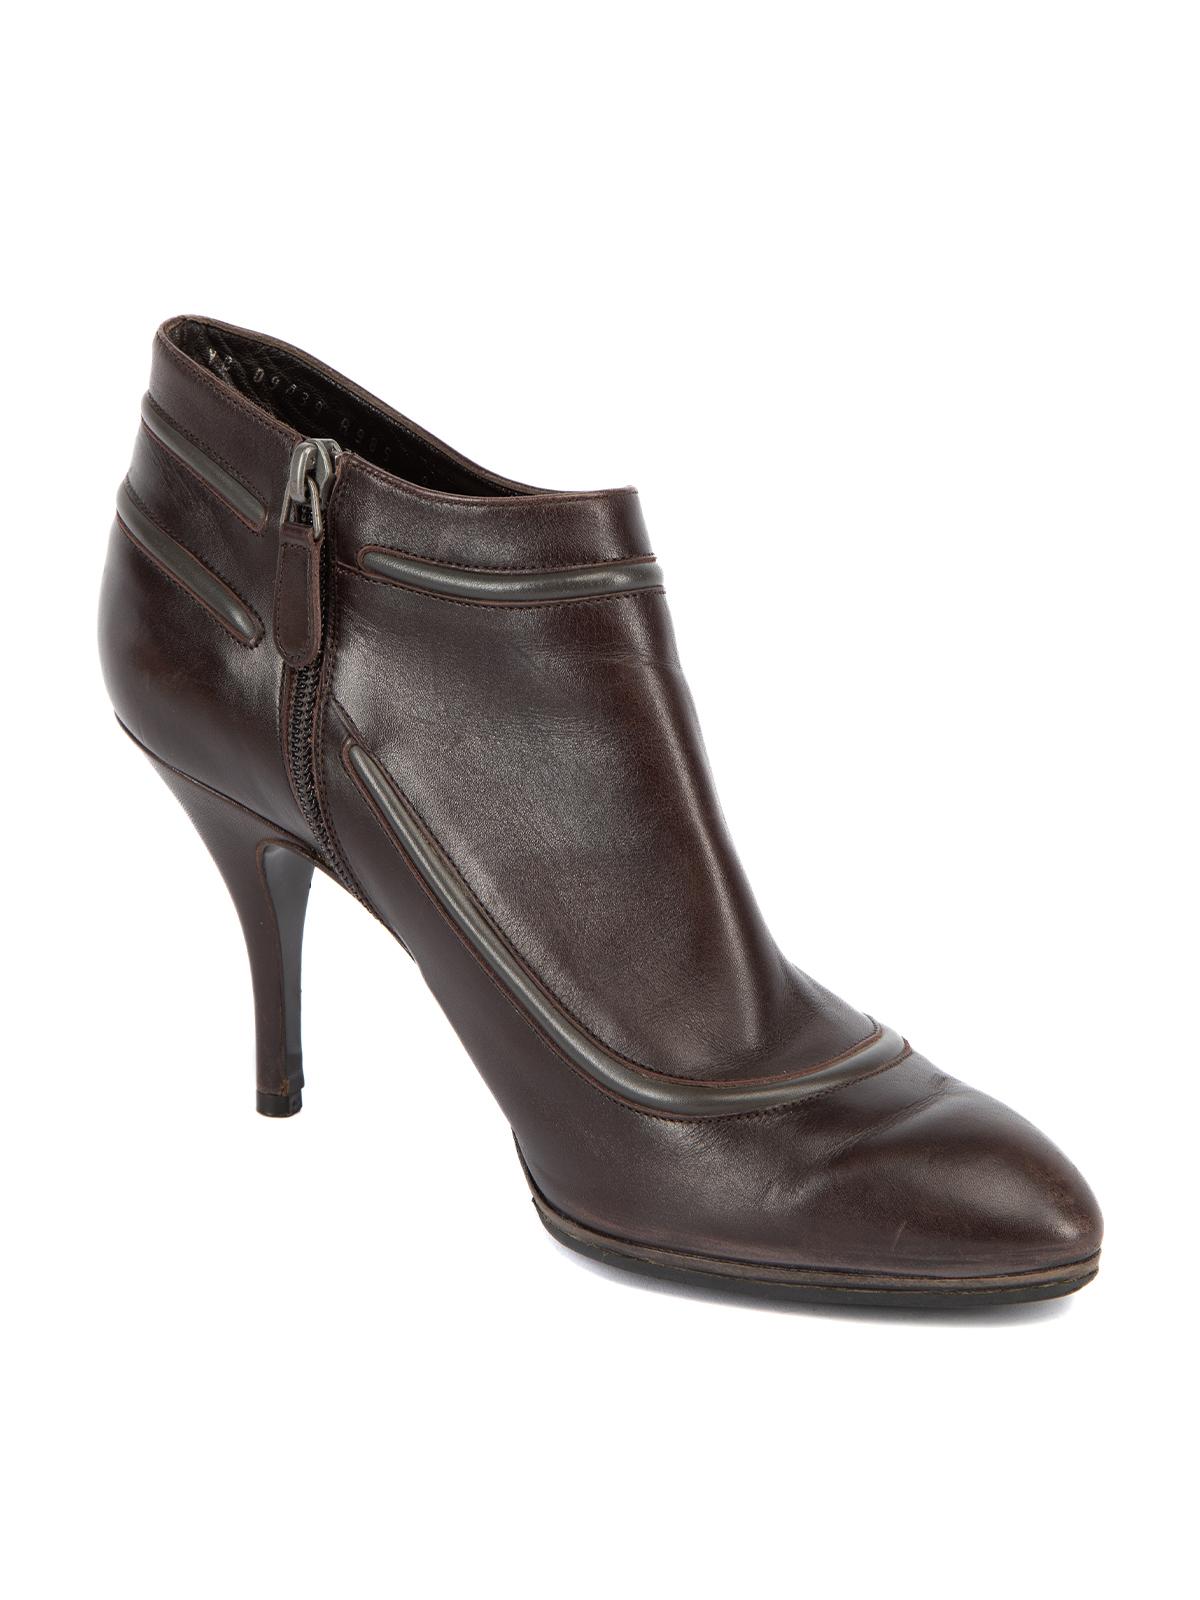 CONDITION is Very good. Minimal wear to heels is evident. Some scuff marks are visible to leather exterior, mainly to the toes on this used Salvatore Ferragamo designer resale item. Details Brown Leather Ankle boots Pointed toe High heel Black